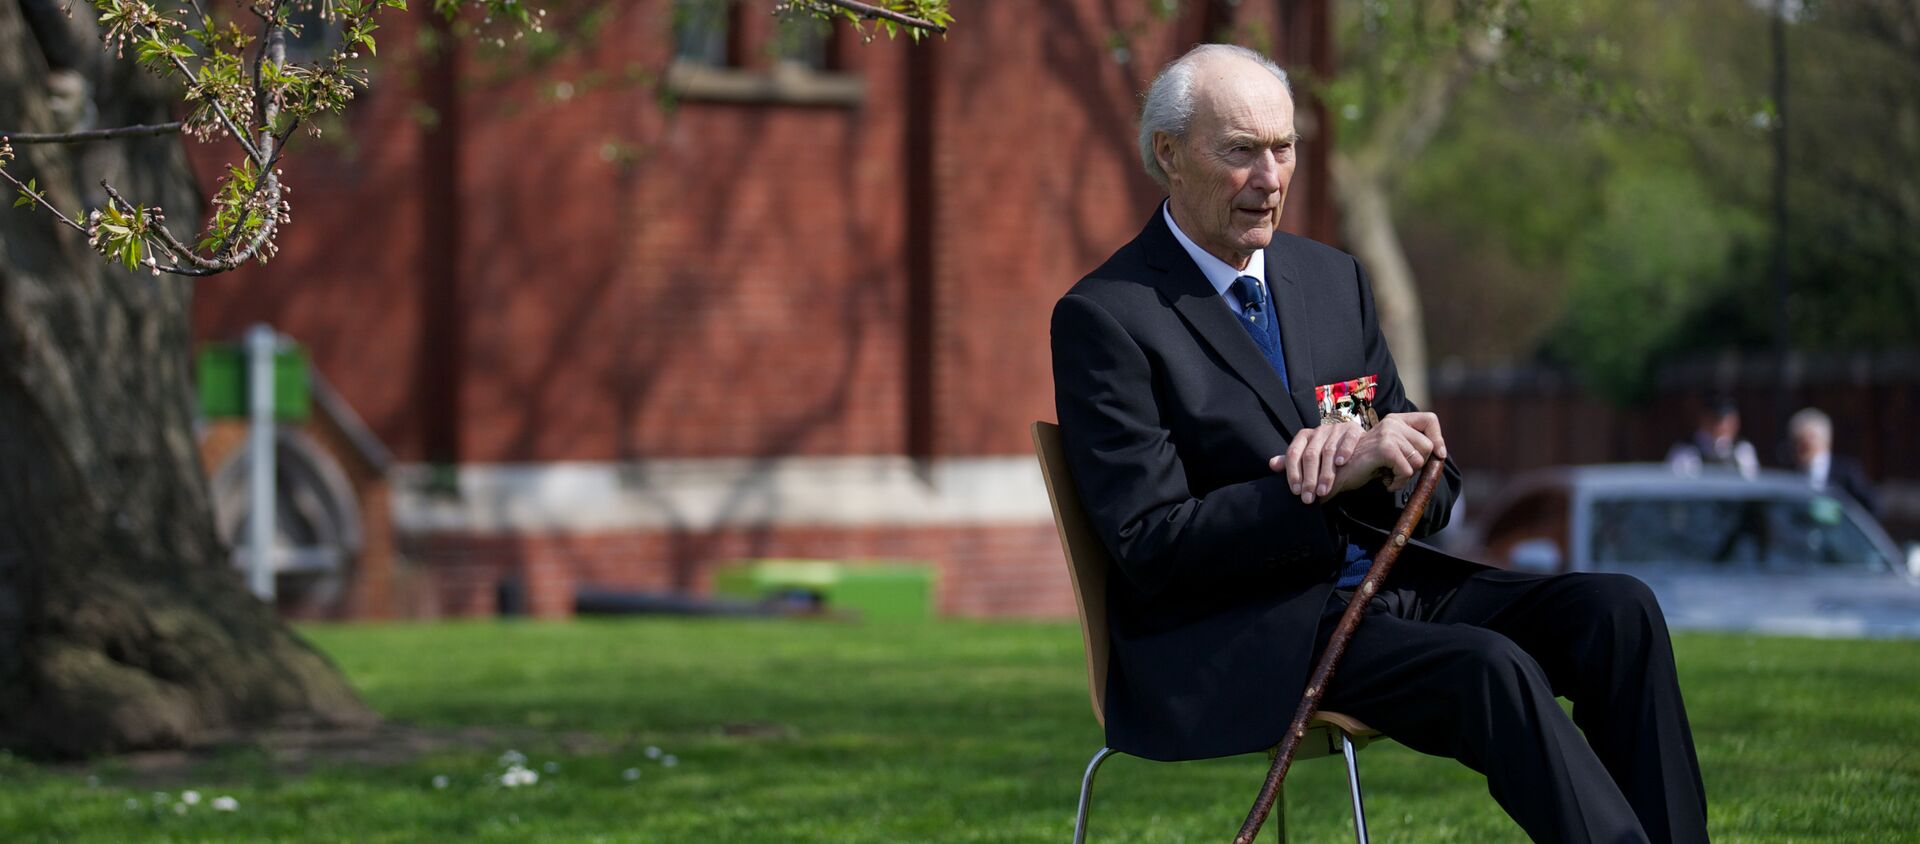 Norwegian World War II hero Joachim Ronneberg, 93, attends a wreath-laying ceremony in his honour at the SOE agents monument in central London on April 25, 2013, for leading the SOE operation Gunnerside where Norwegian soldiers destroyed the German occupied Heavy Water Plant in Vemork, Norway - Sputnik International, 1920, 22.10.2018